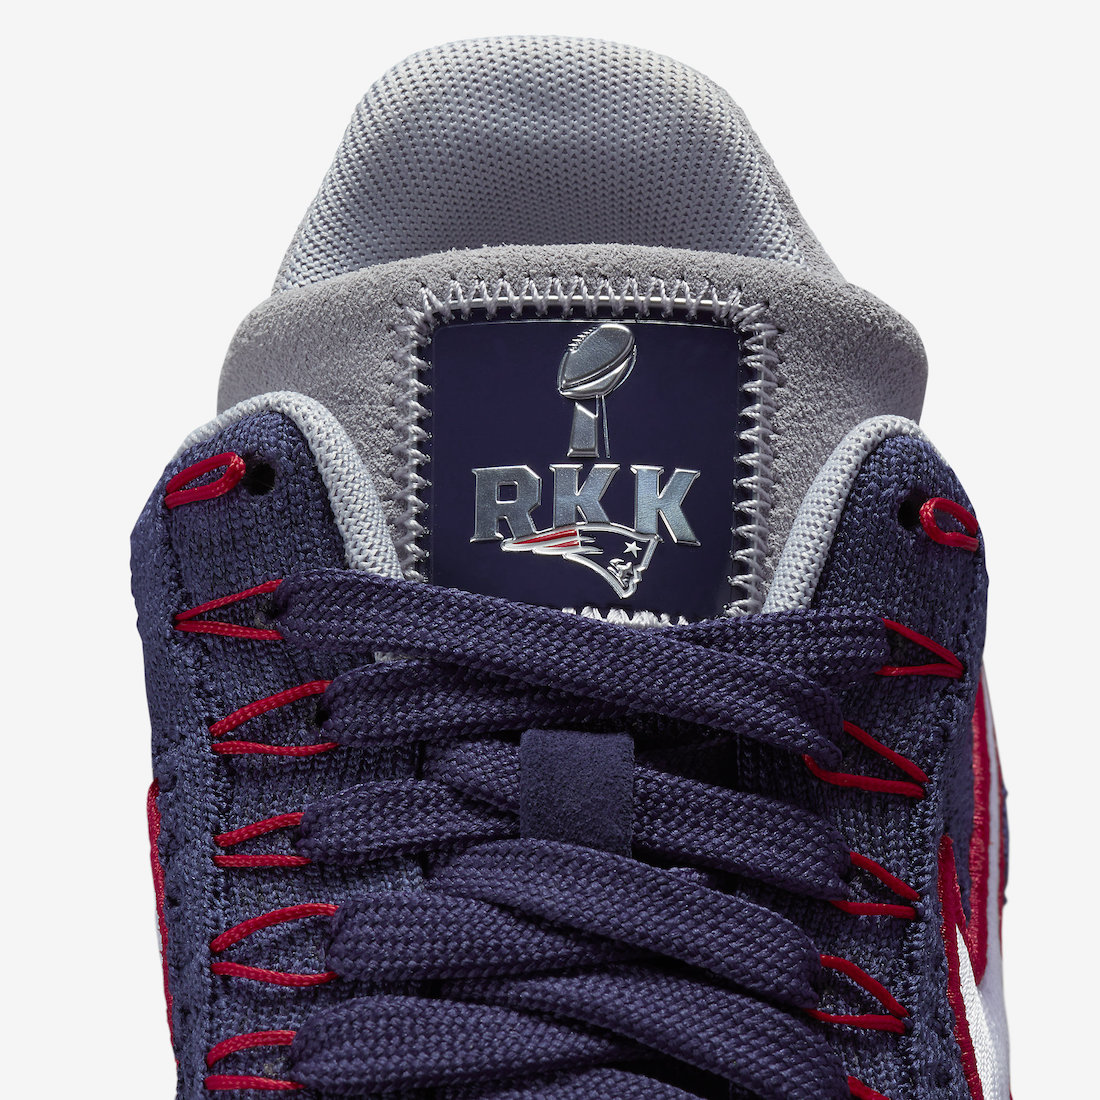 Nike releases latest edition of Robert Kraft's 'Patriots' Air Force 1